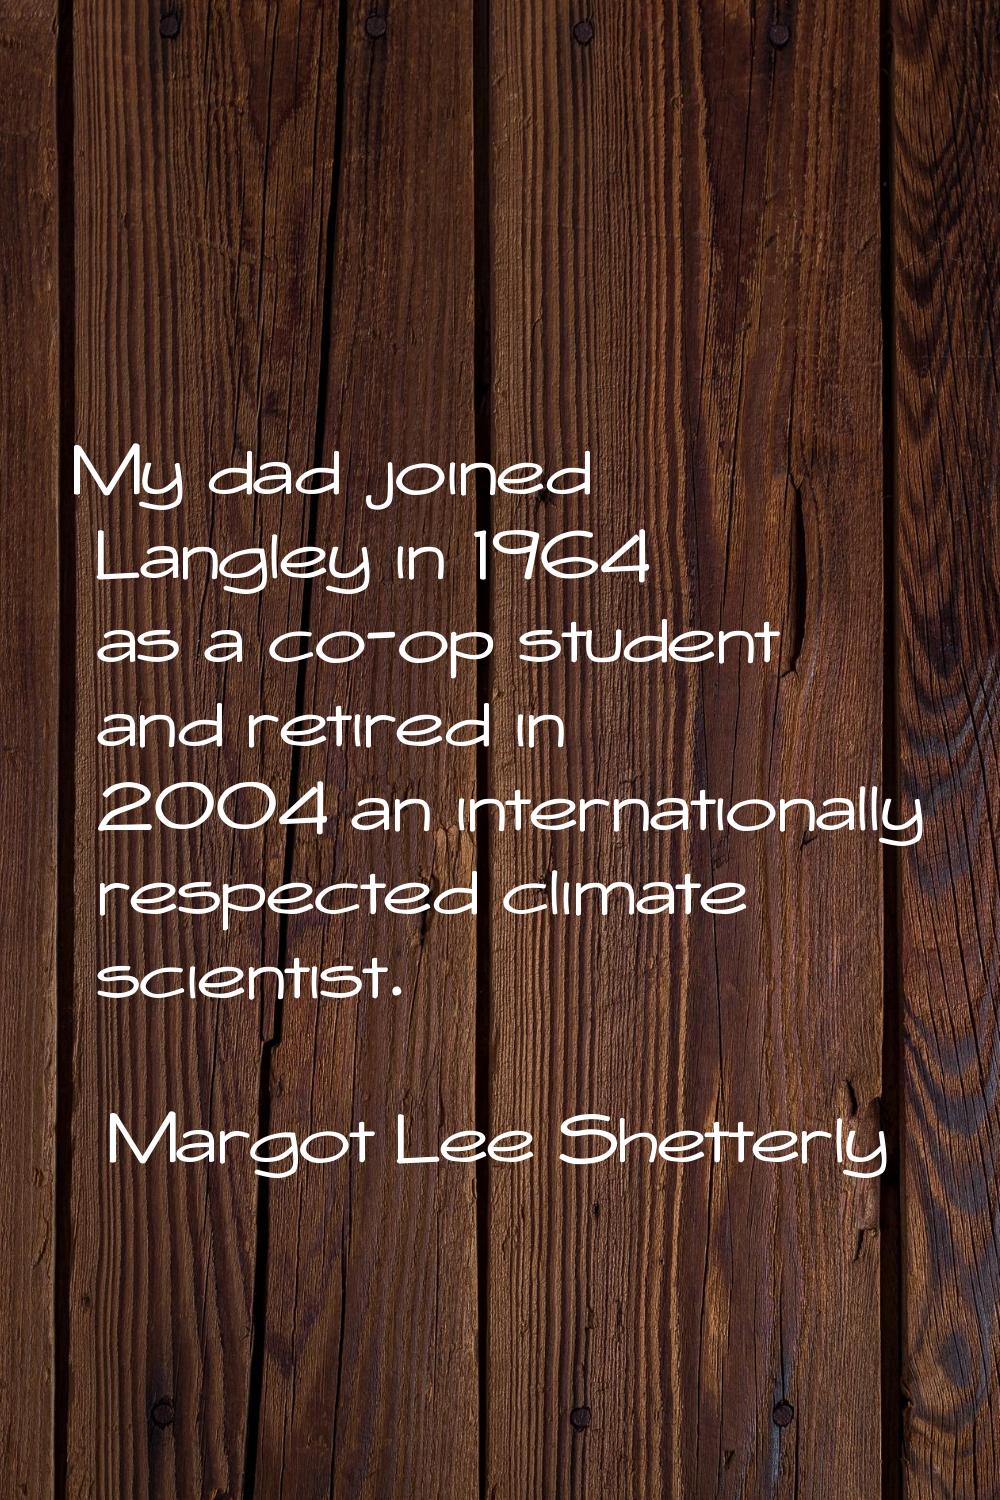 My dad joined Langley in 1964 as a co-op student and retired in 2004 an internationally respected c